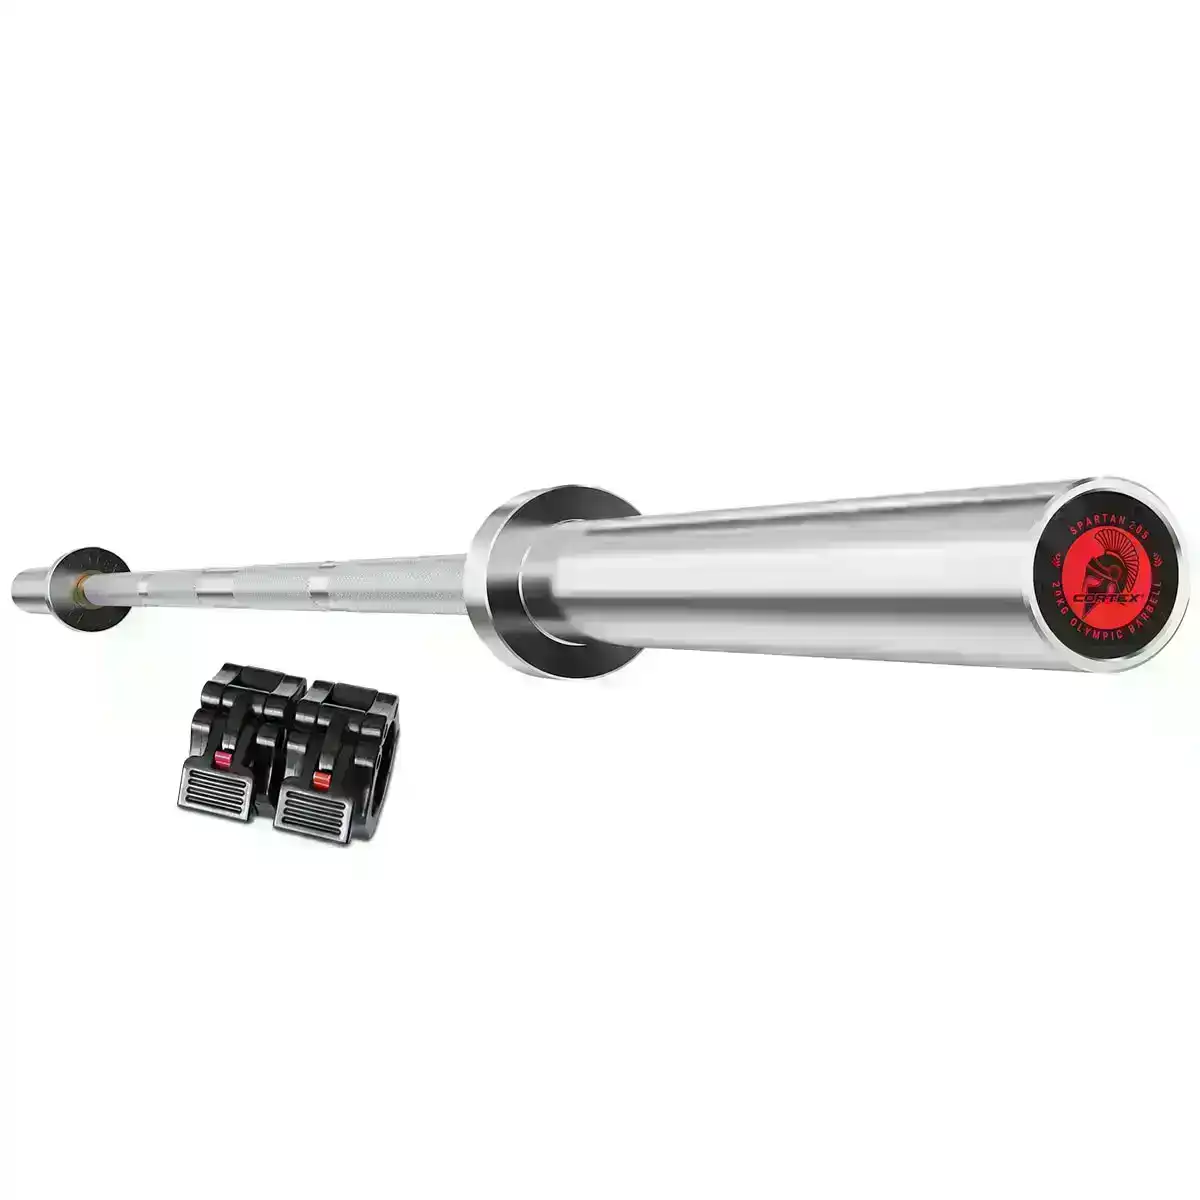 Cortex SPARTAN205 7ft 20kg Olympic Barbell (Hard Chrome) with Lockjaw Collars